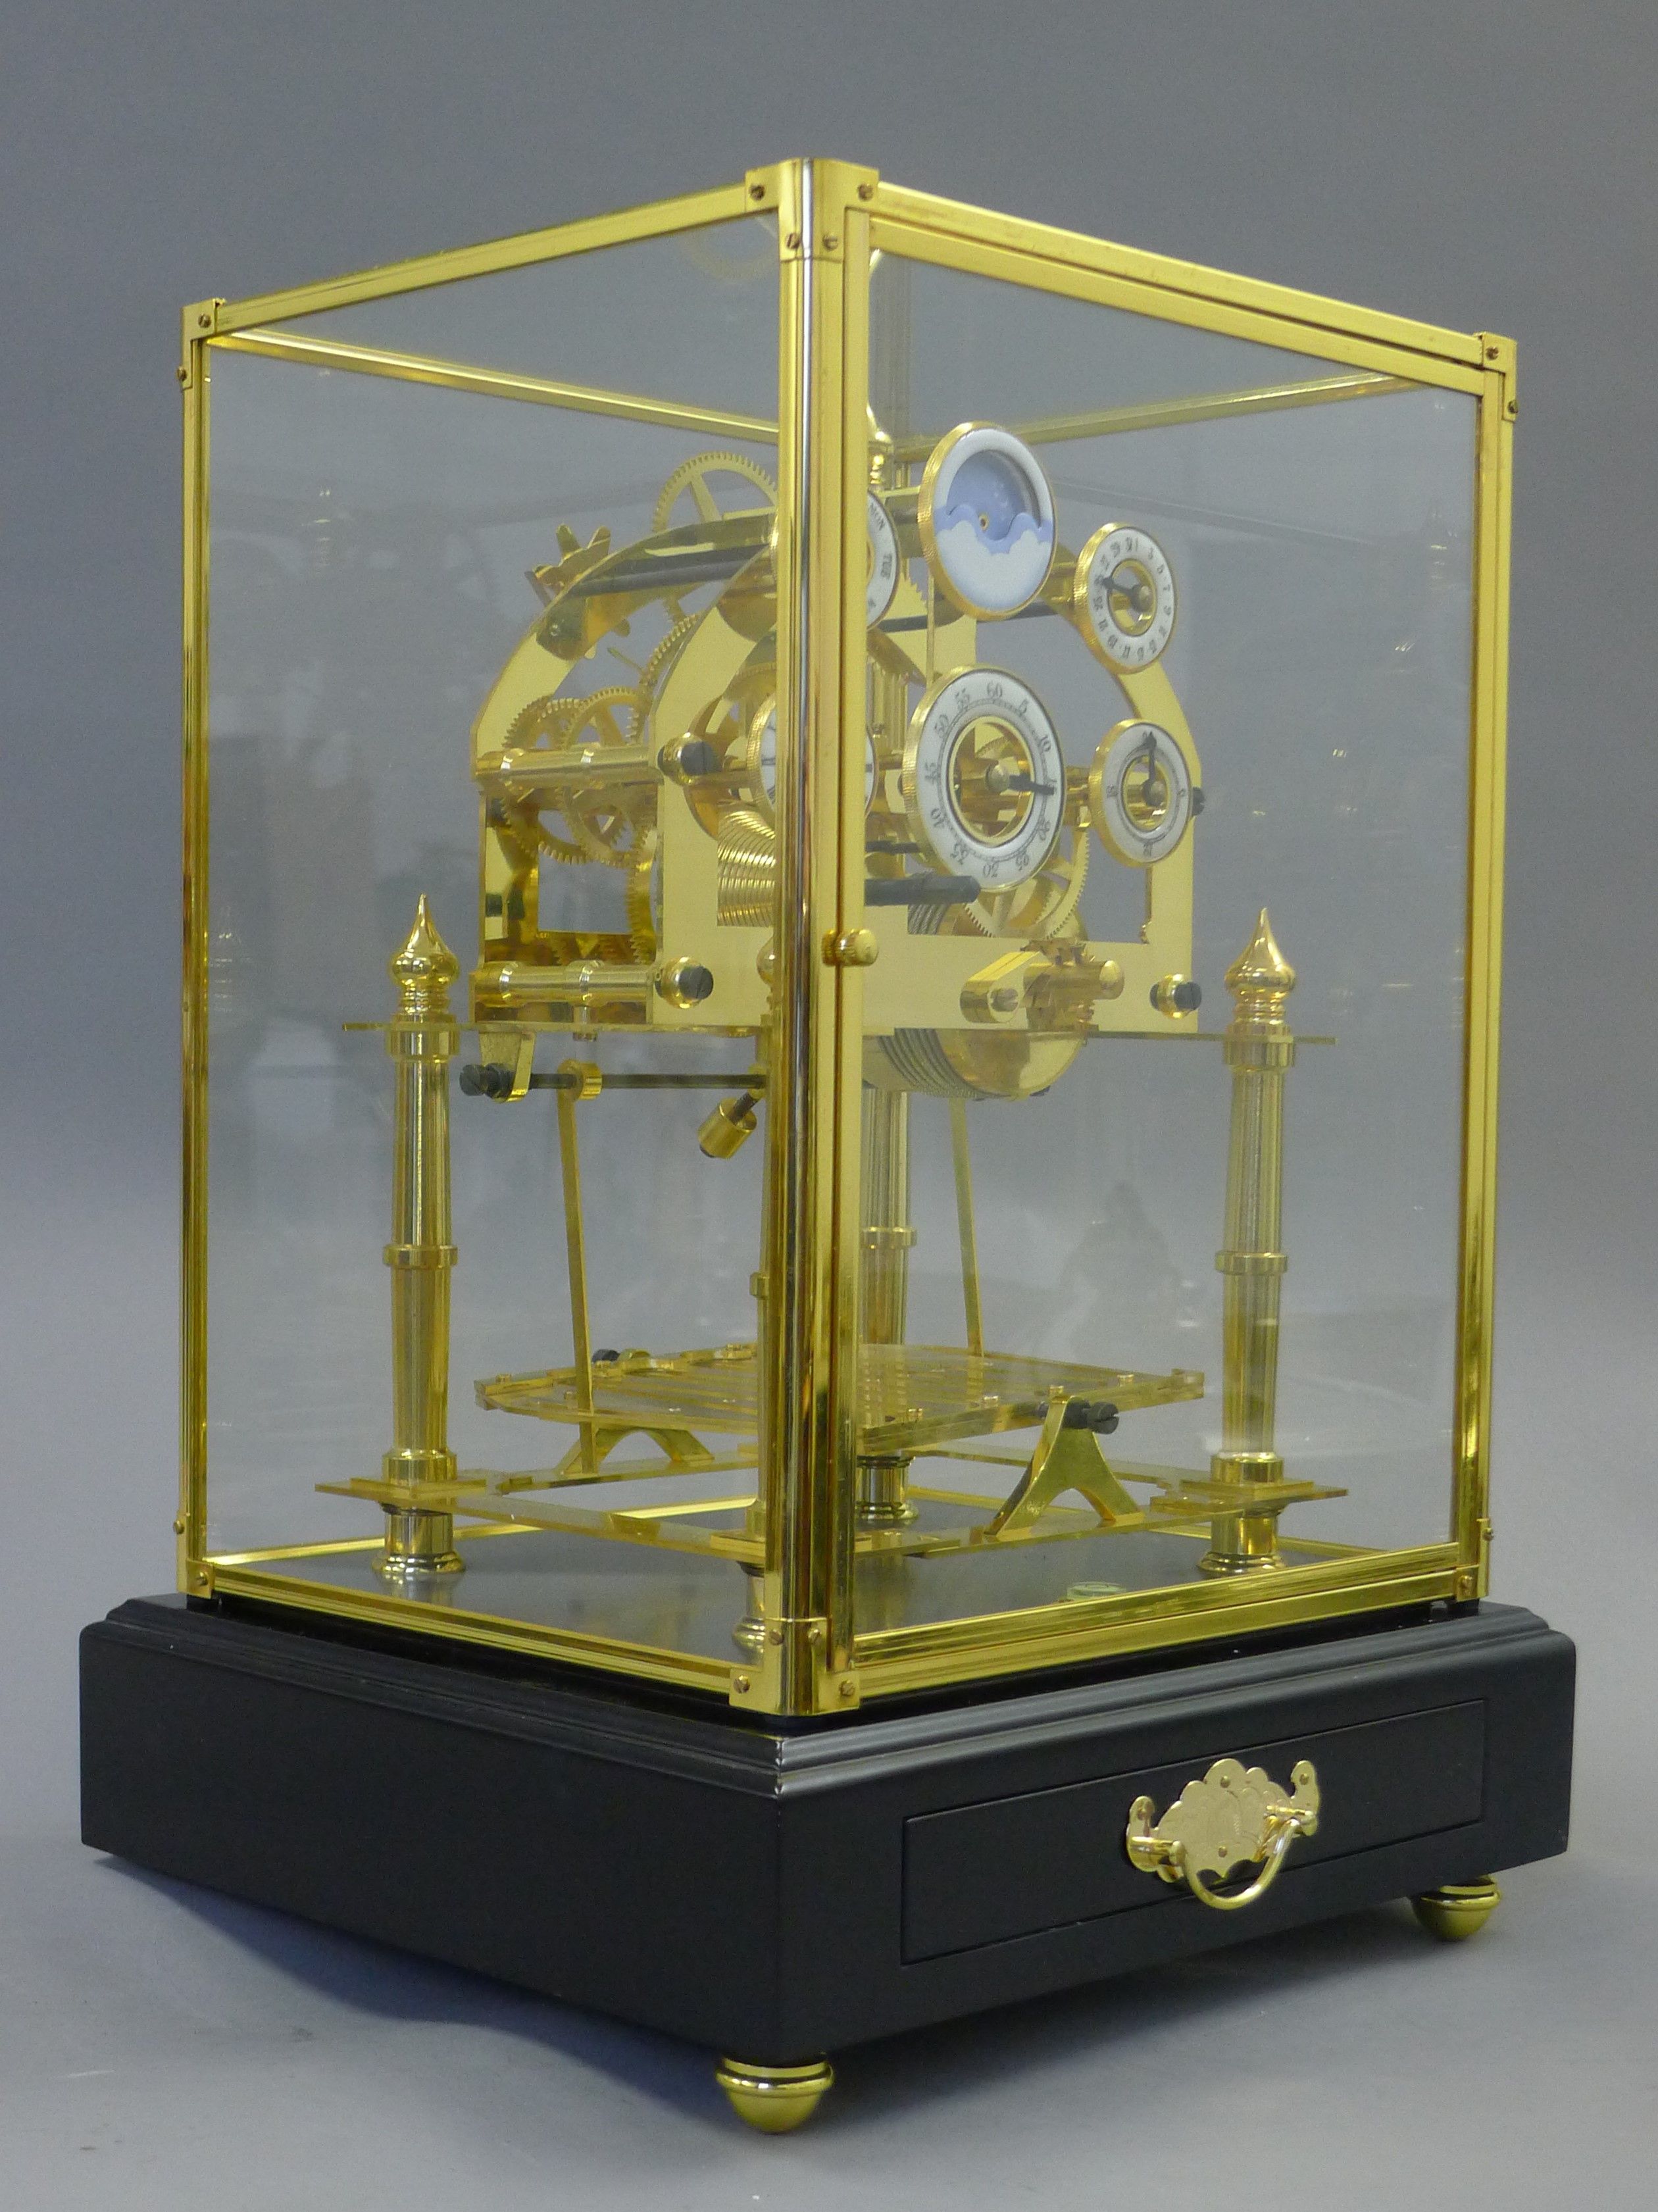 A moon phase congreave clock. 43 cm high. - Image 3 of 5